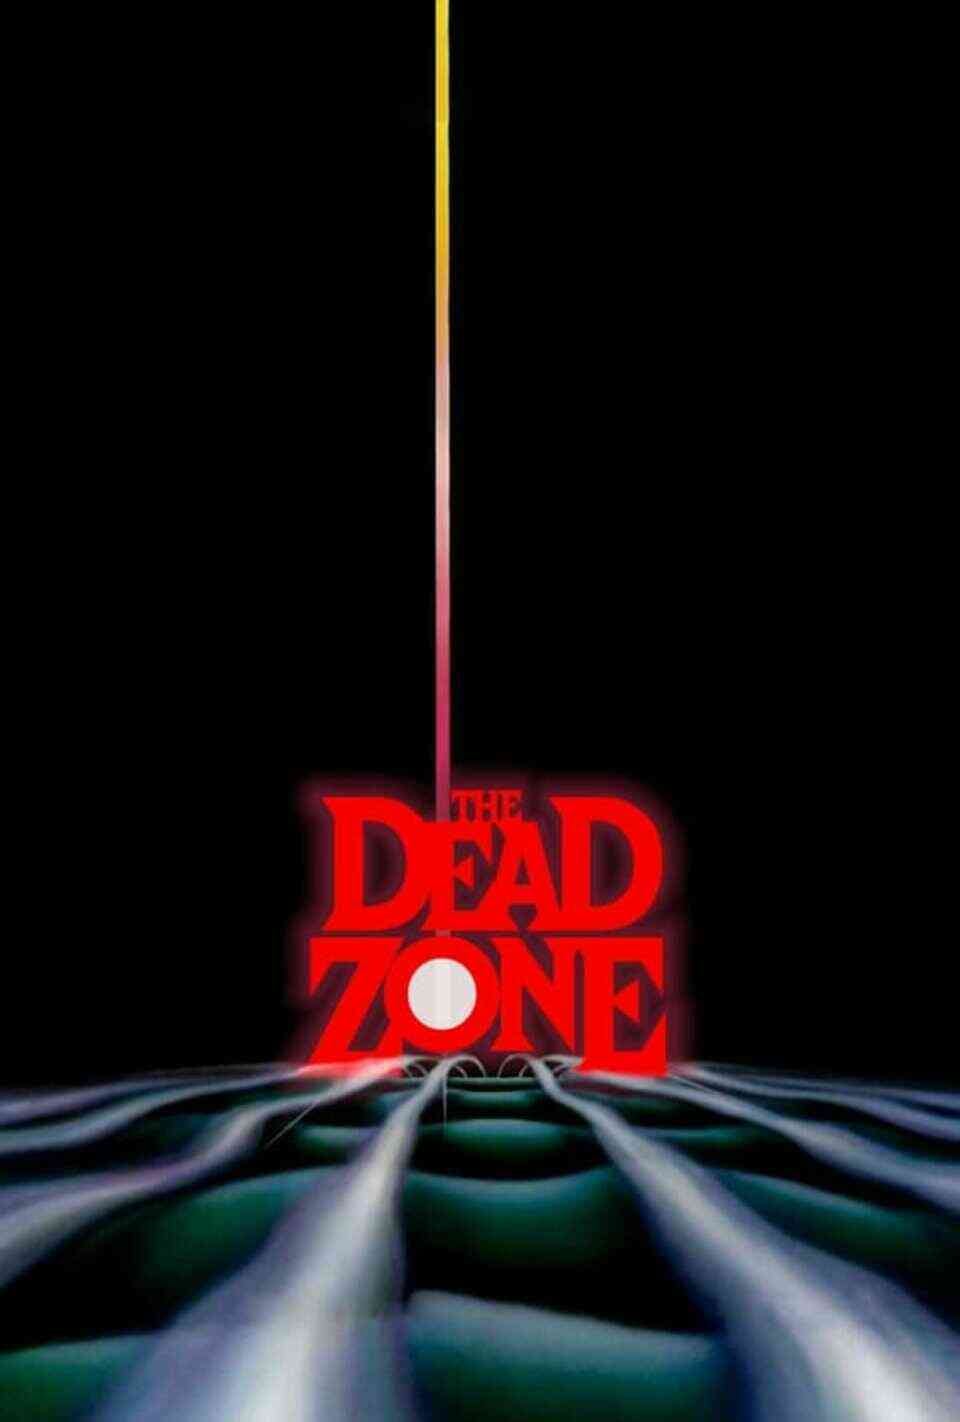 Read The Dead Zone screenplay (poster)